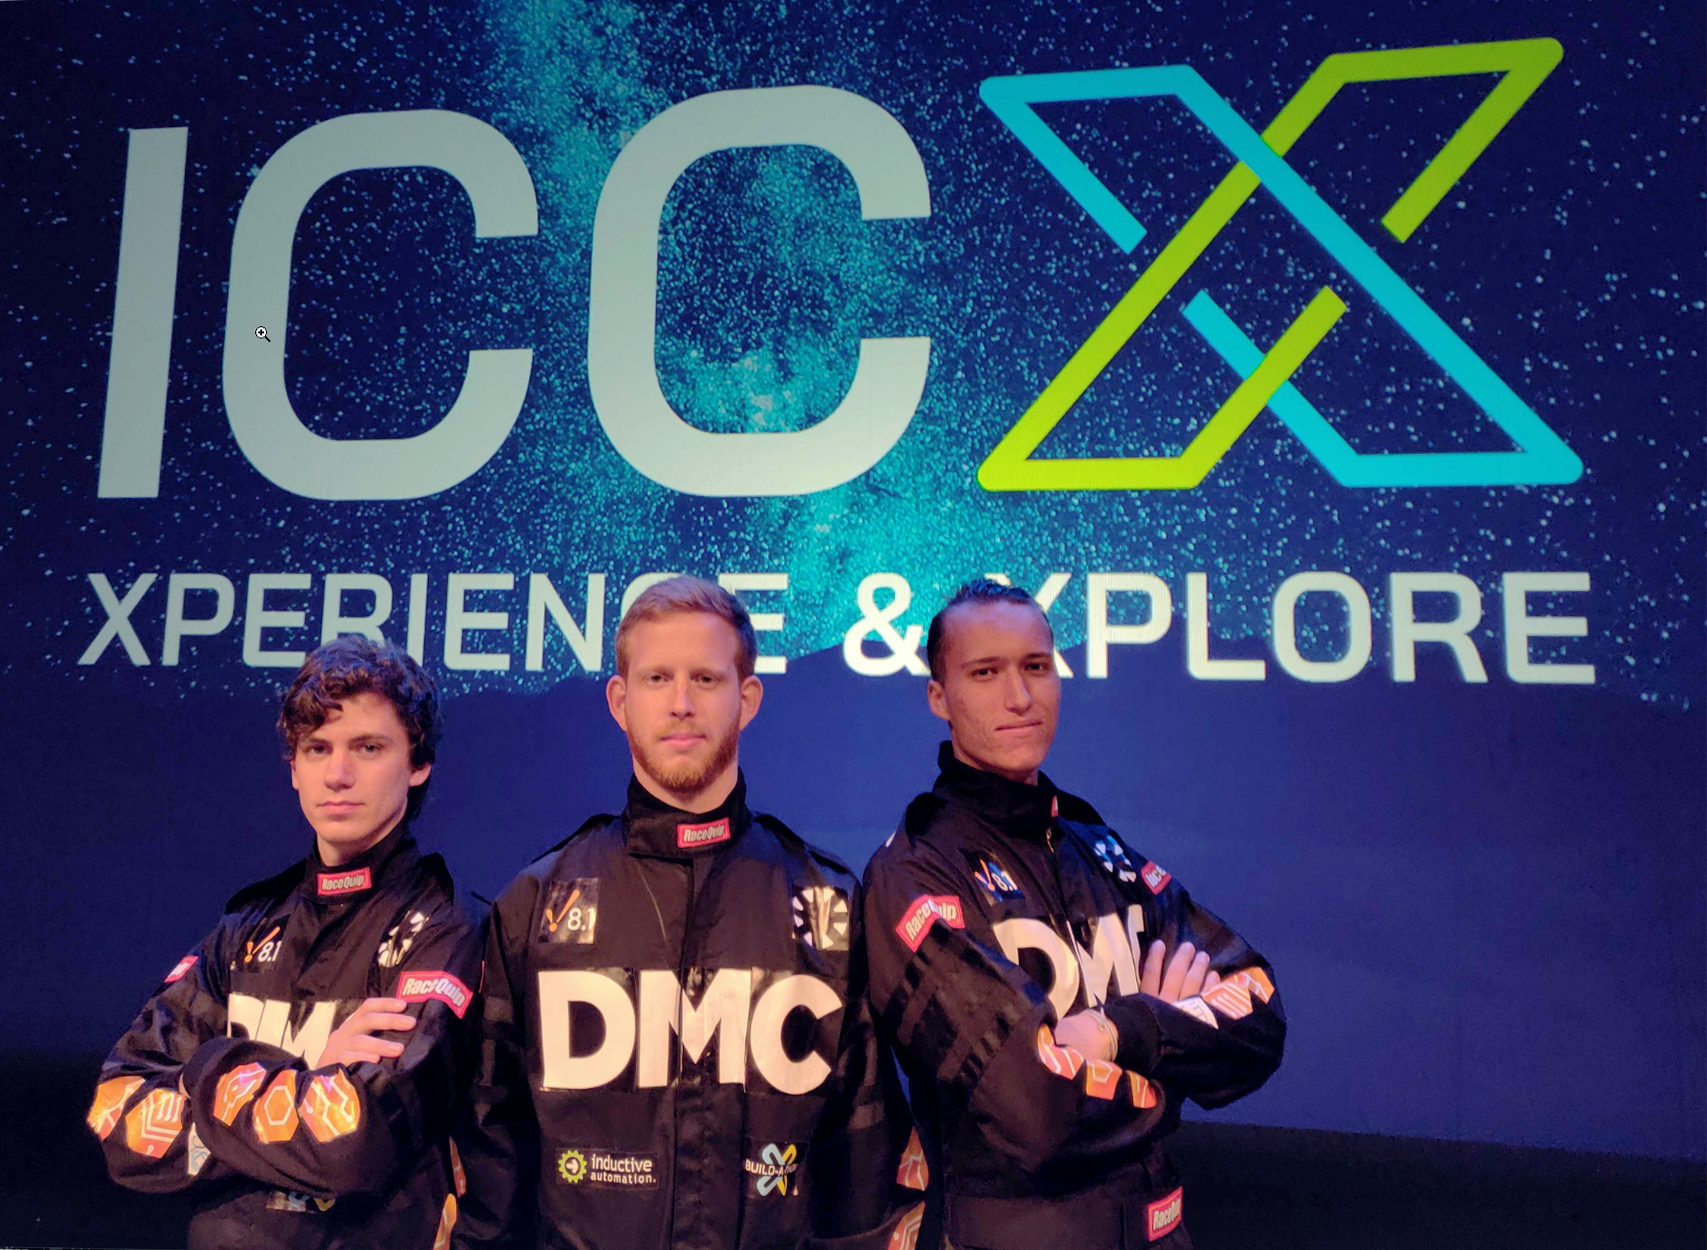 DMC in custom racing suits at the ICC Build-a-Thon